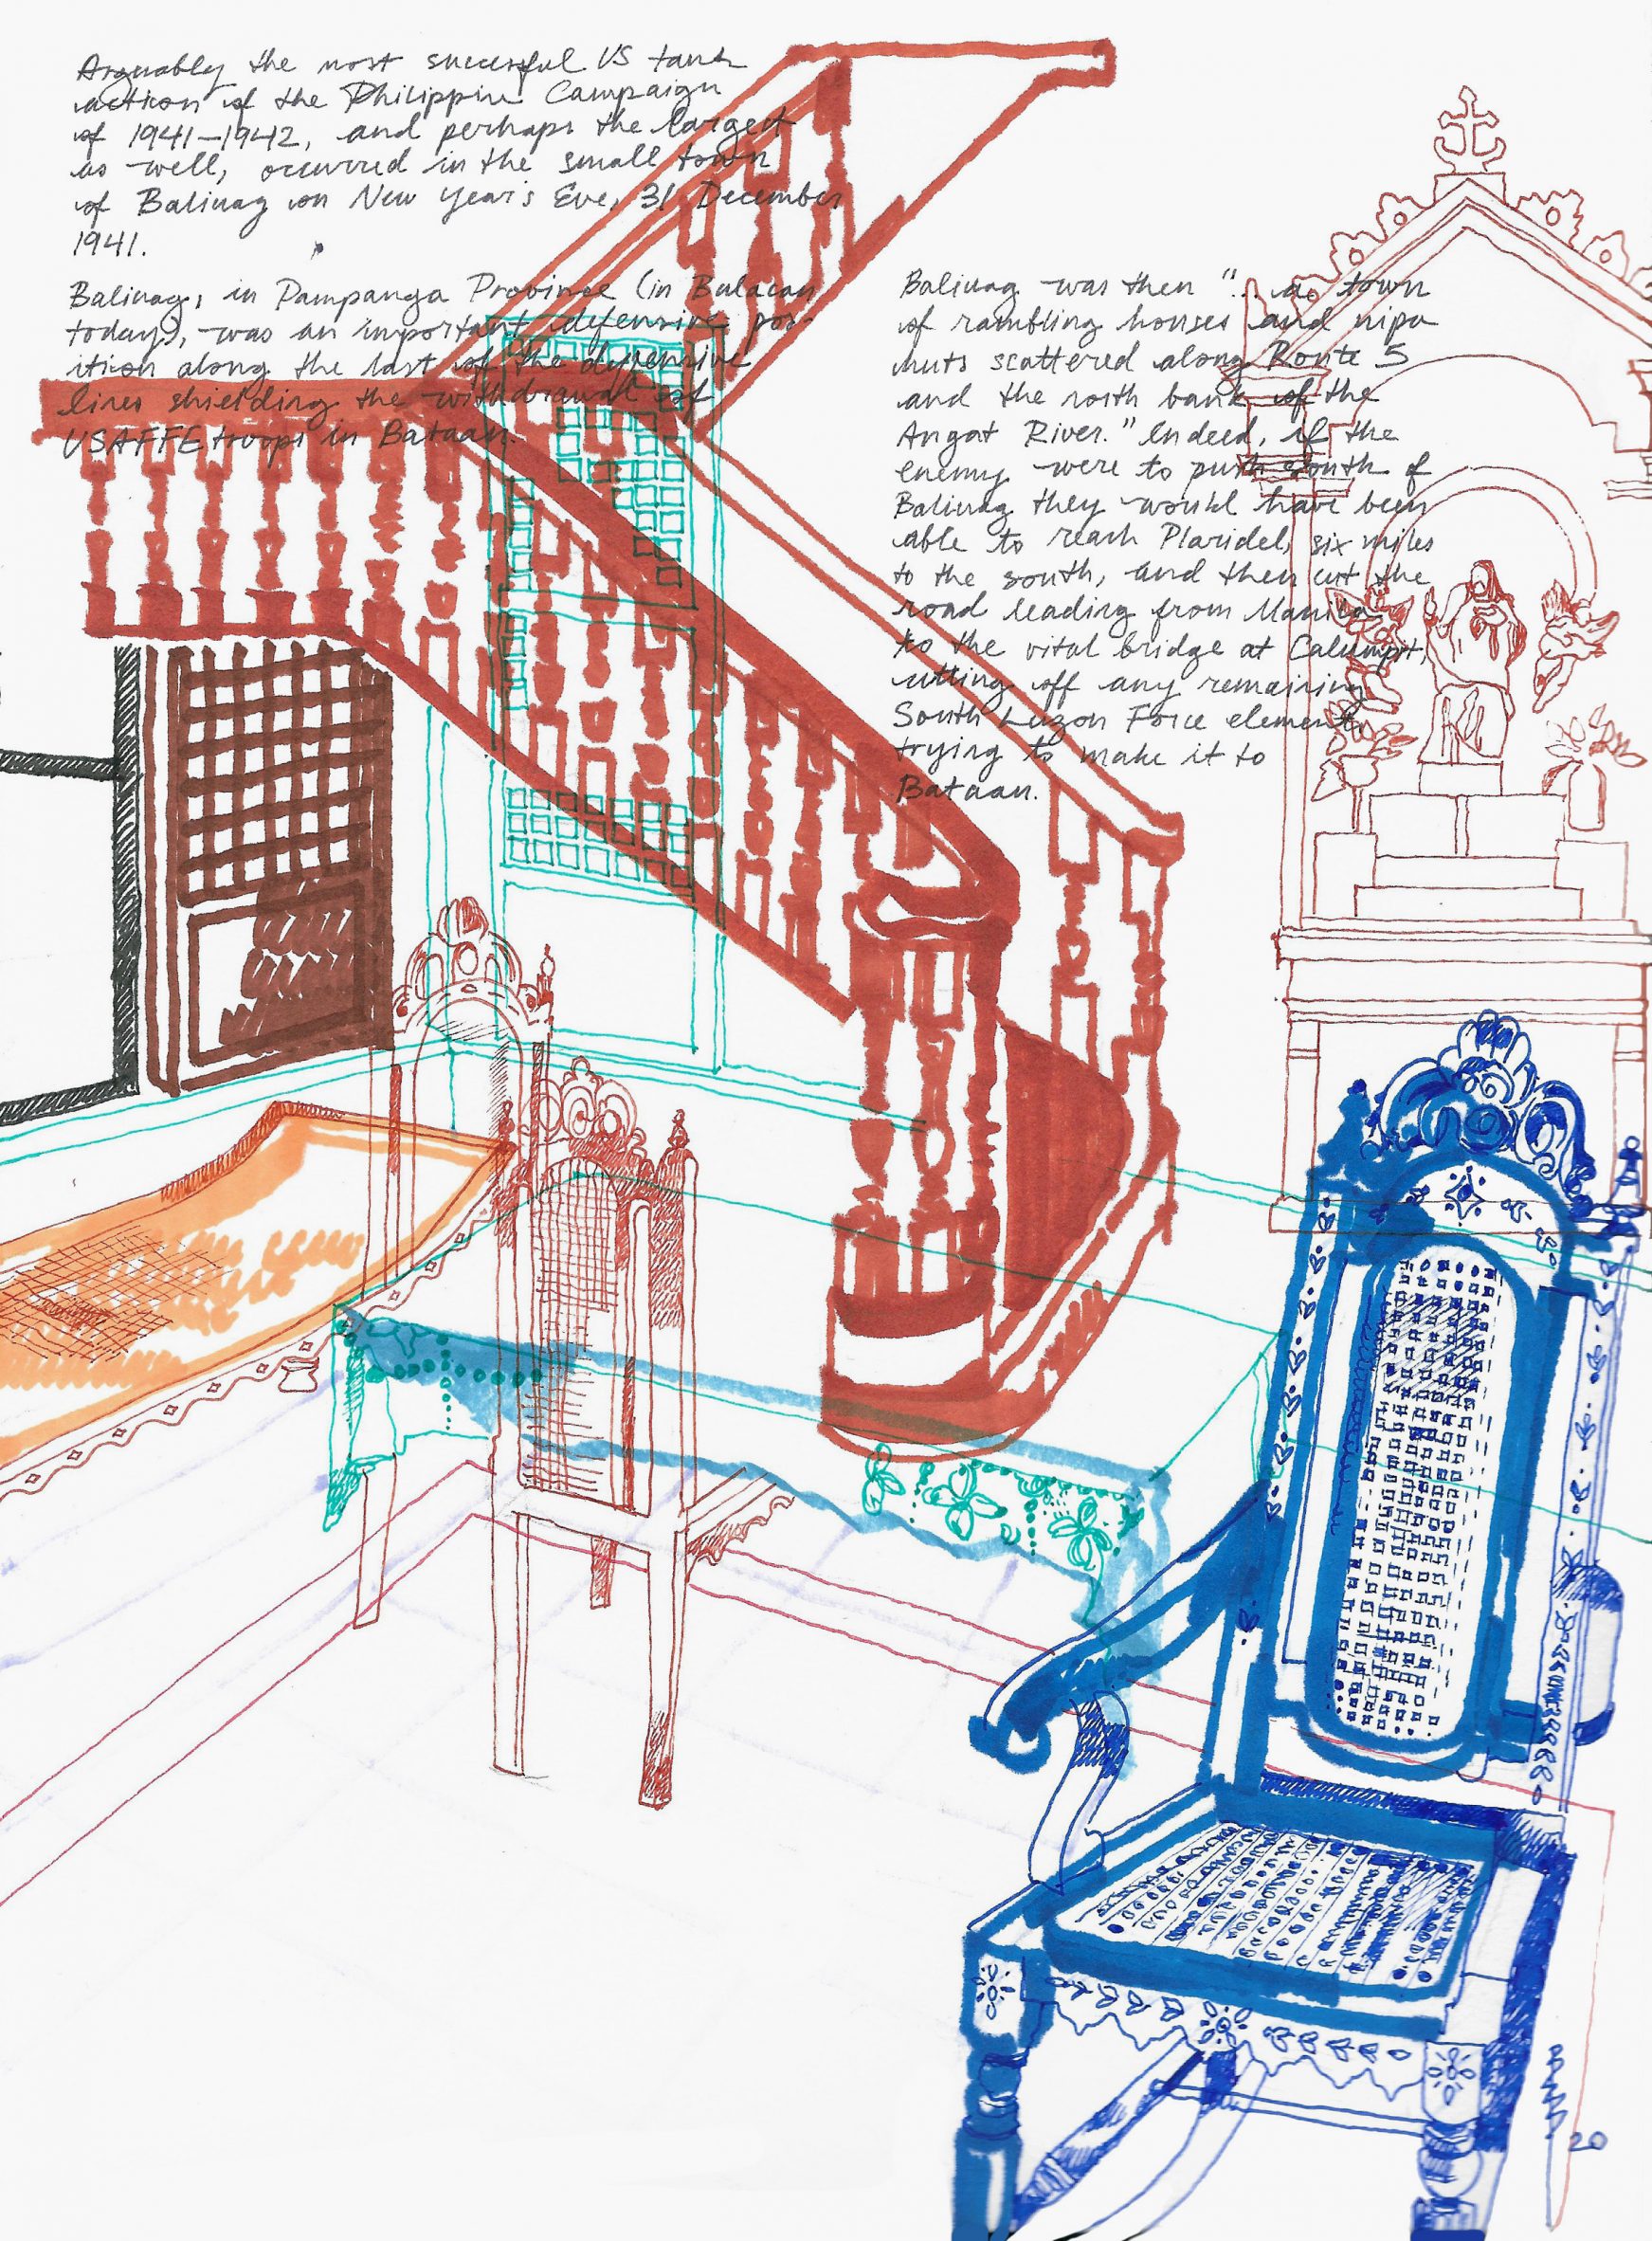 Visualisation showing staircase and chairs in interior with overlaid handwritten text